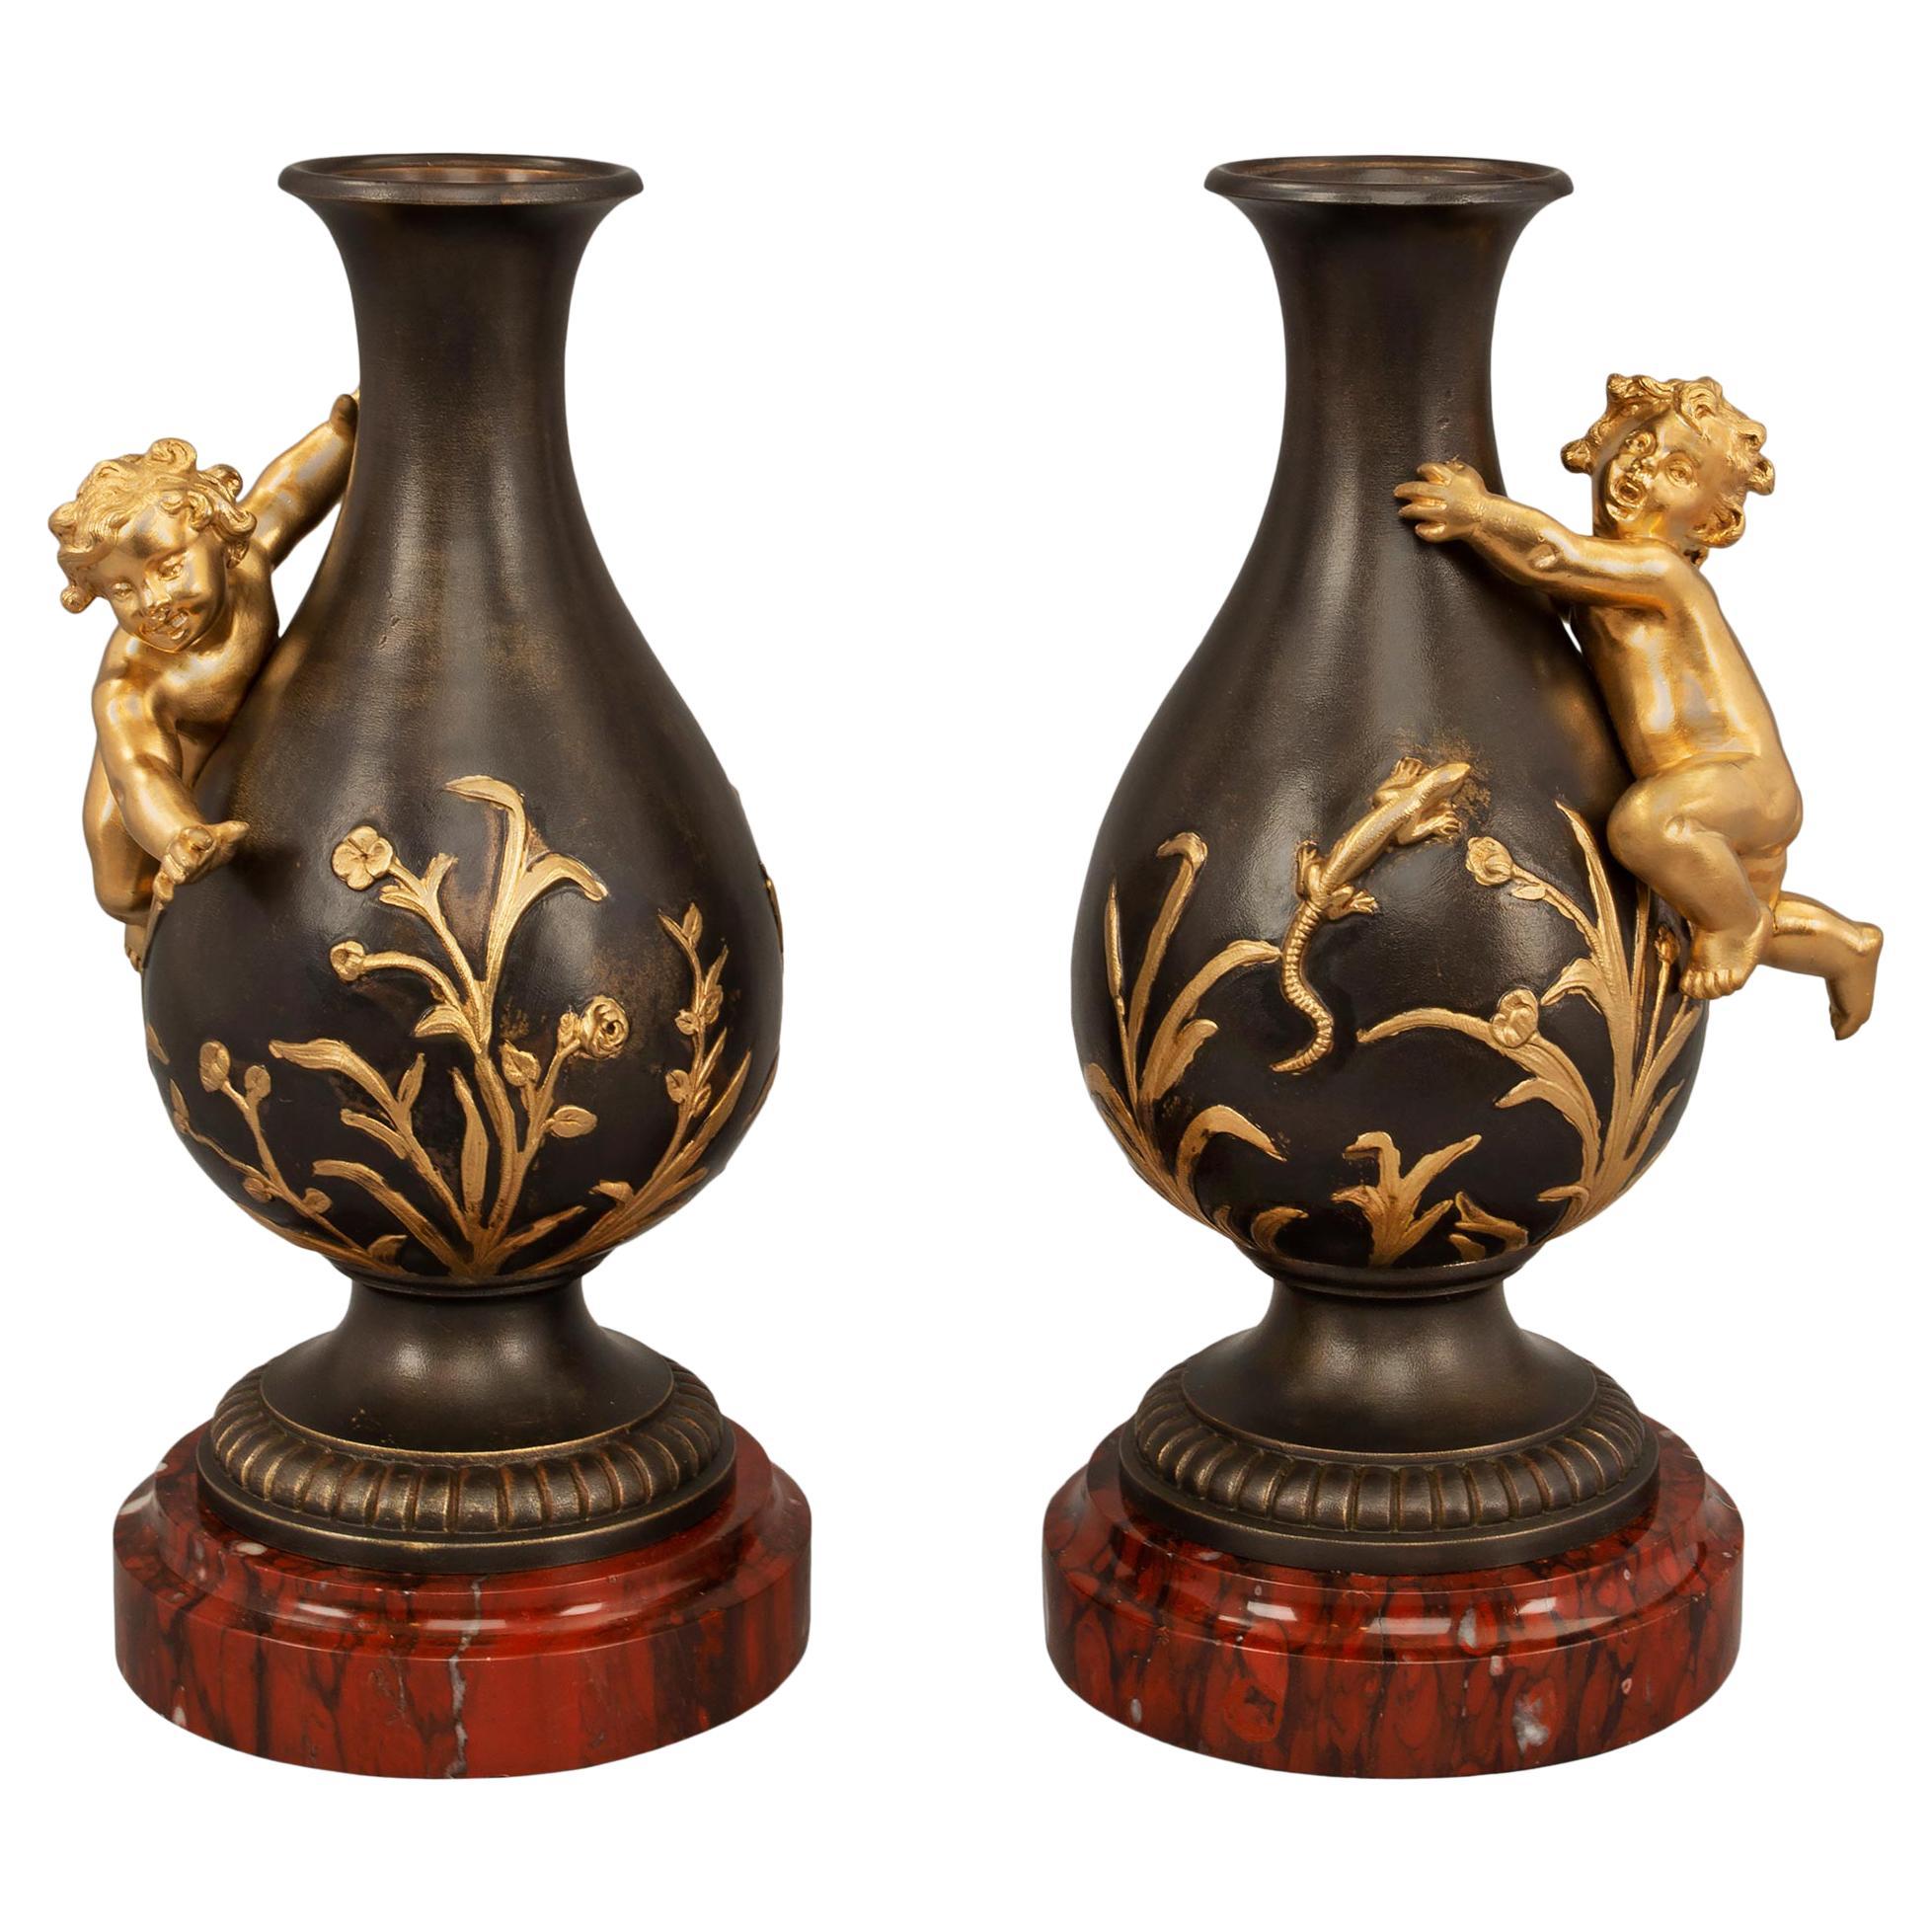 Pair of Exquisite Louis XVI Style Bronze and Ormolu Vases, Attributed to Moreau For Sale